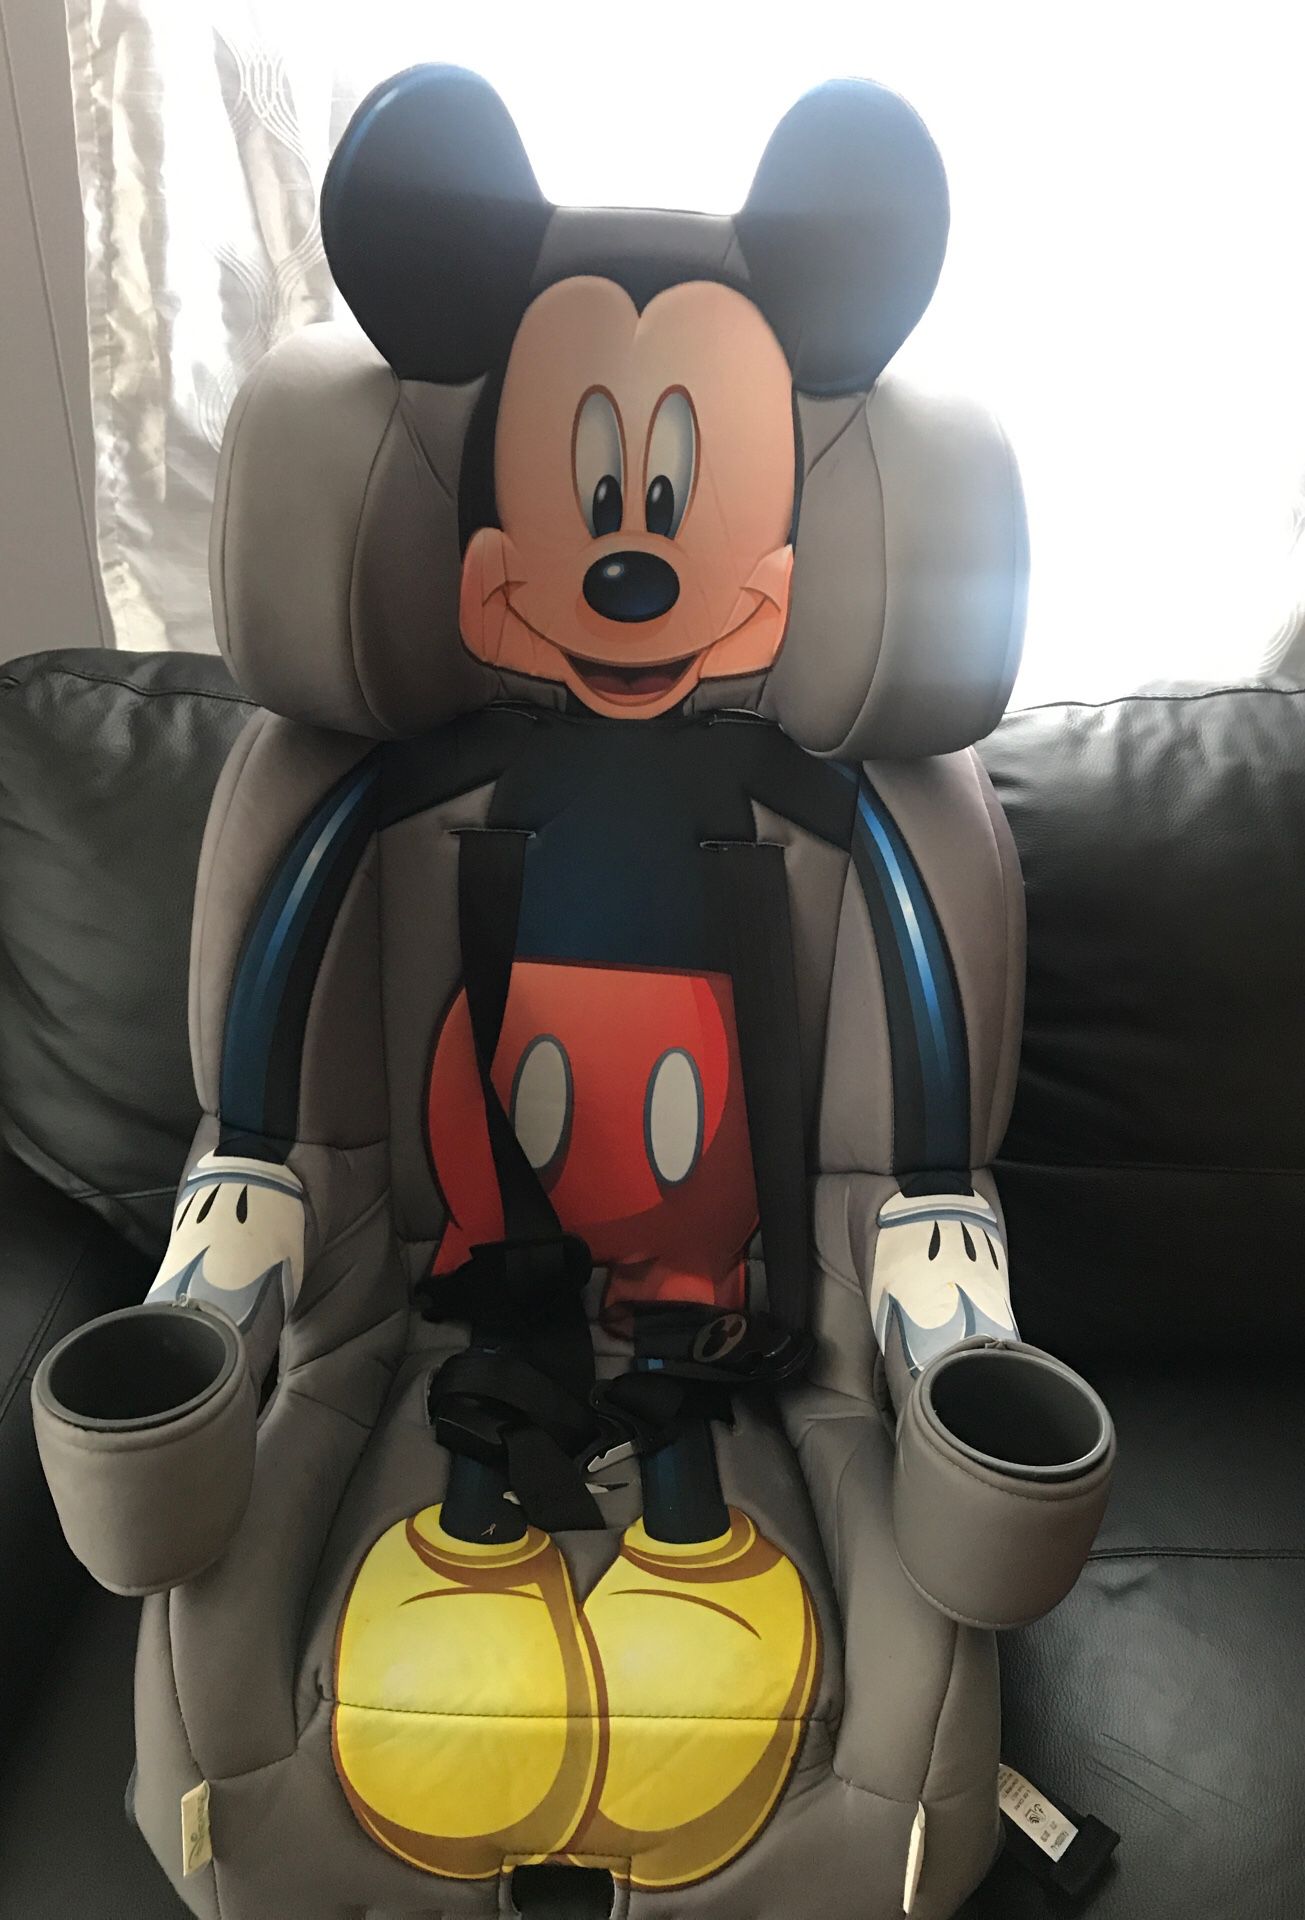 Mickey Mouse combination booster car seat, in good condition